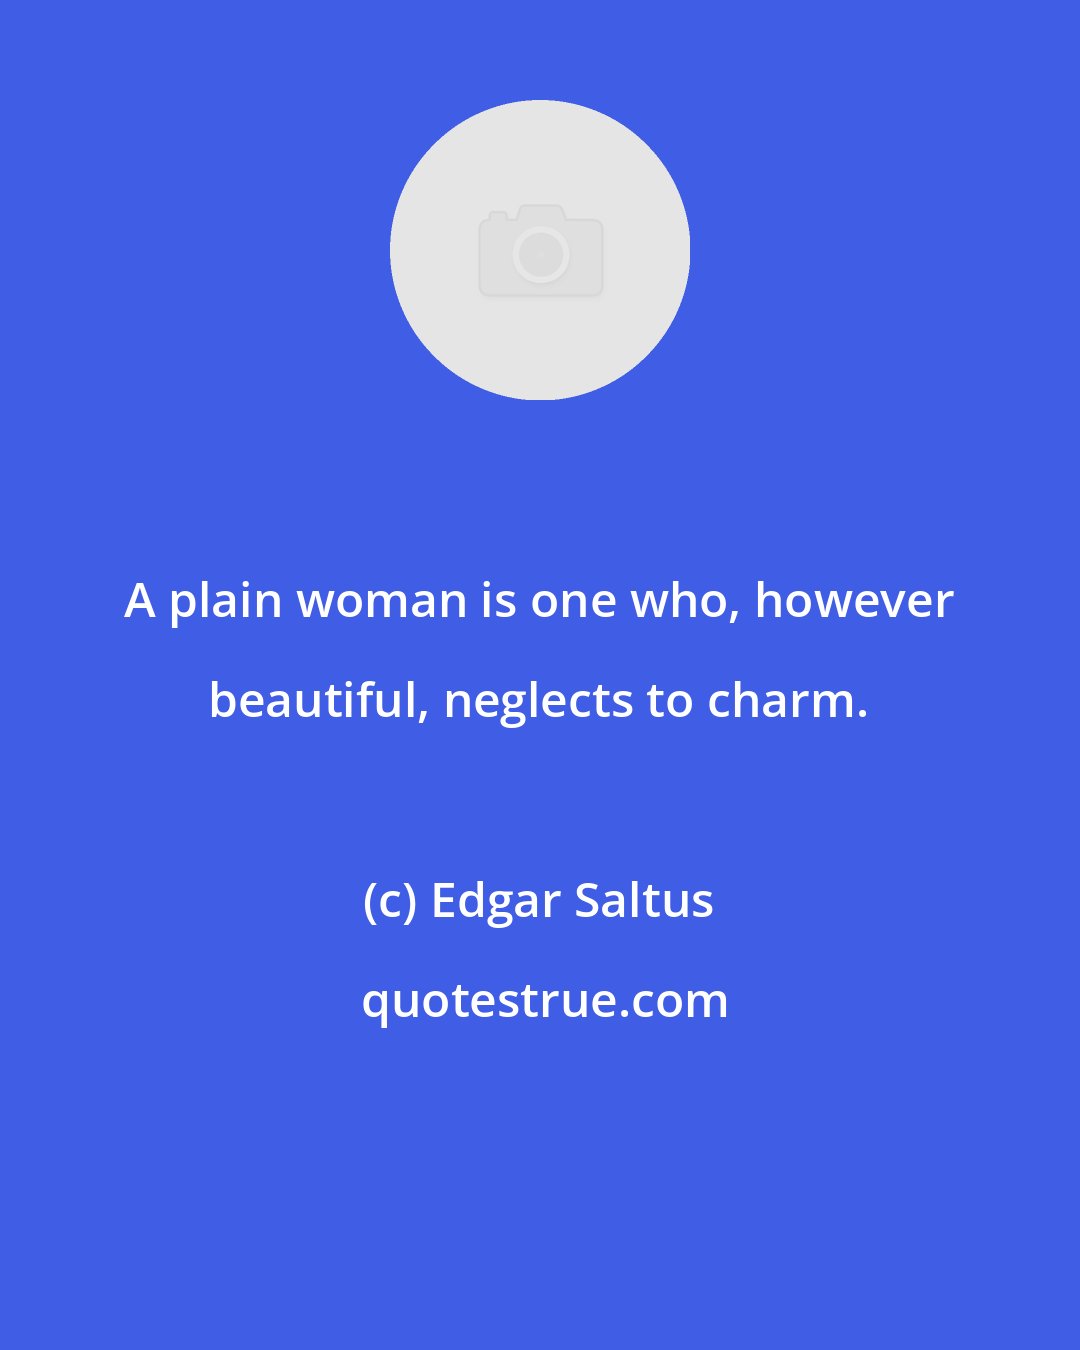 Edgar Saltus: A plain woman is one who, however beautiful, neglects to charm.